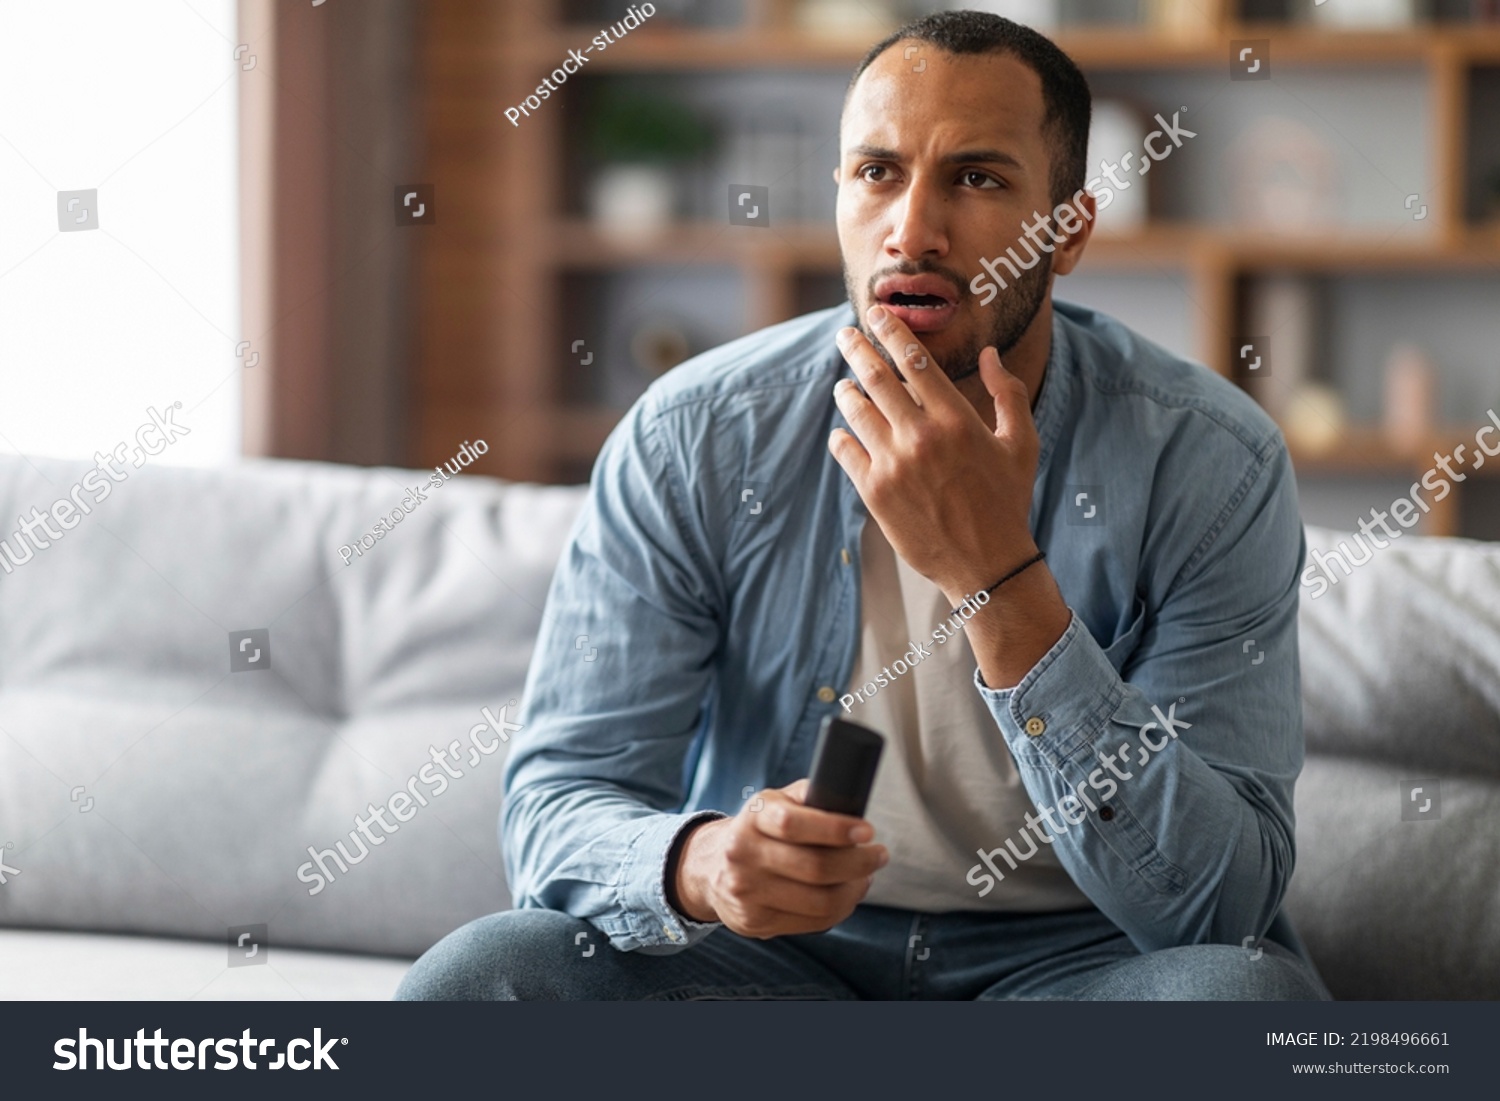 Shocked Black Man With Remote Controller In Hand Sitting On Couch At Home, Confused Young African American Guy Watching Tv Show In Living Room, Emotionally Reacting To Shocking Content, Copy Space #2198496661